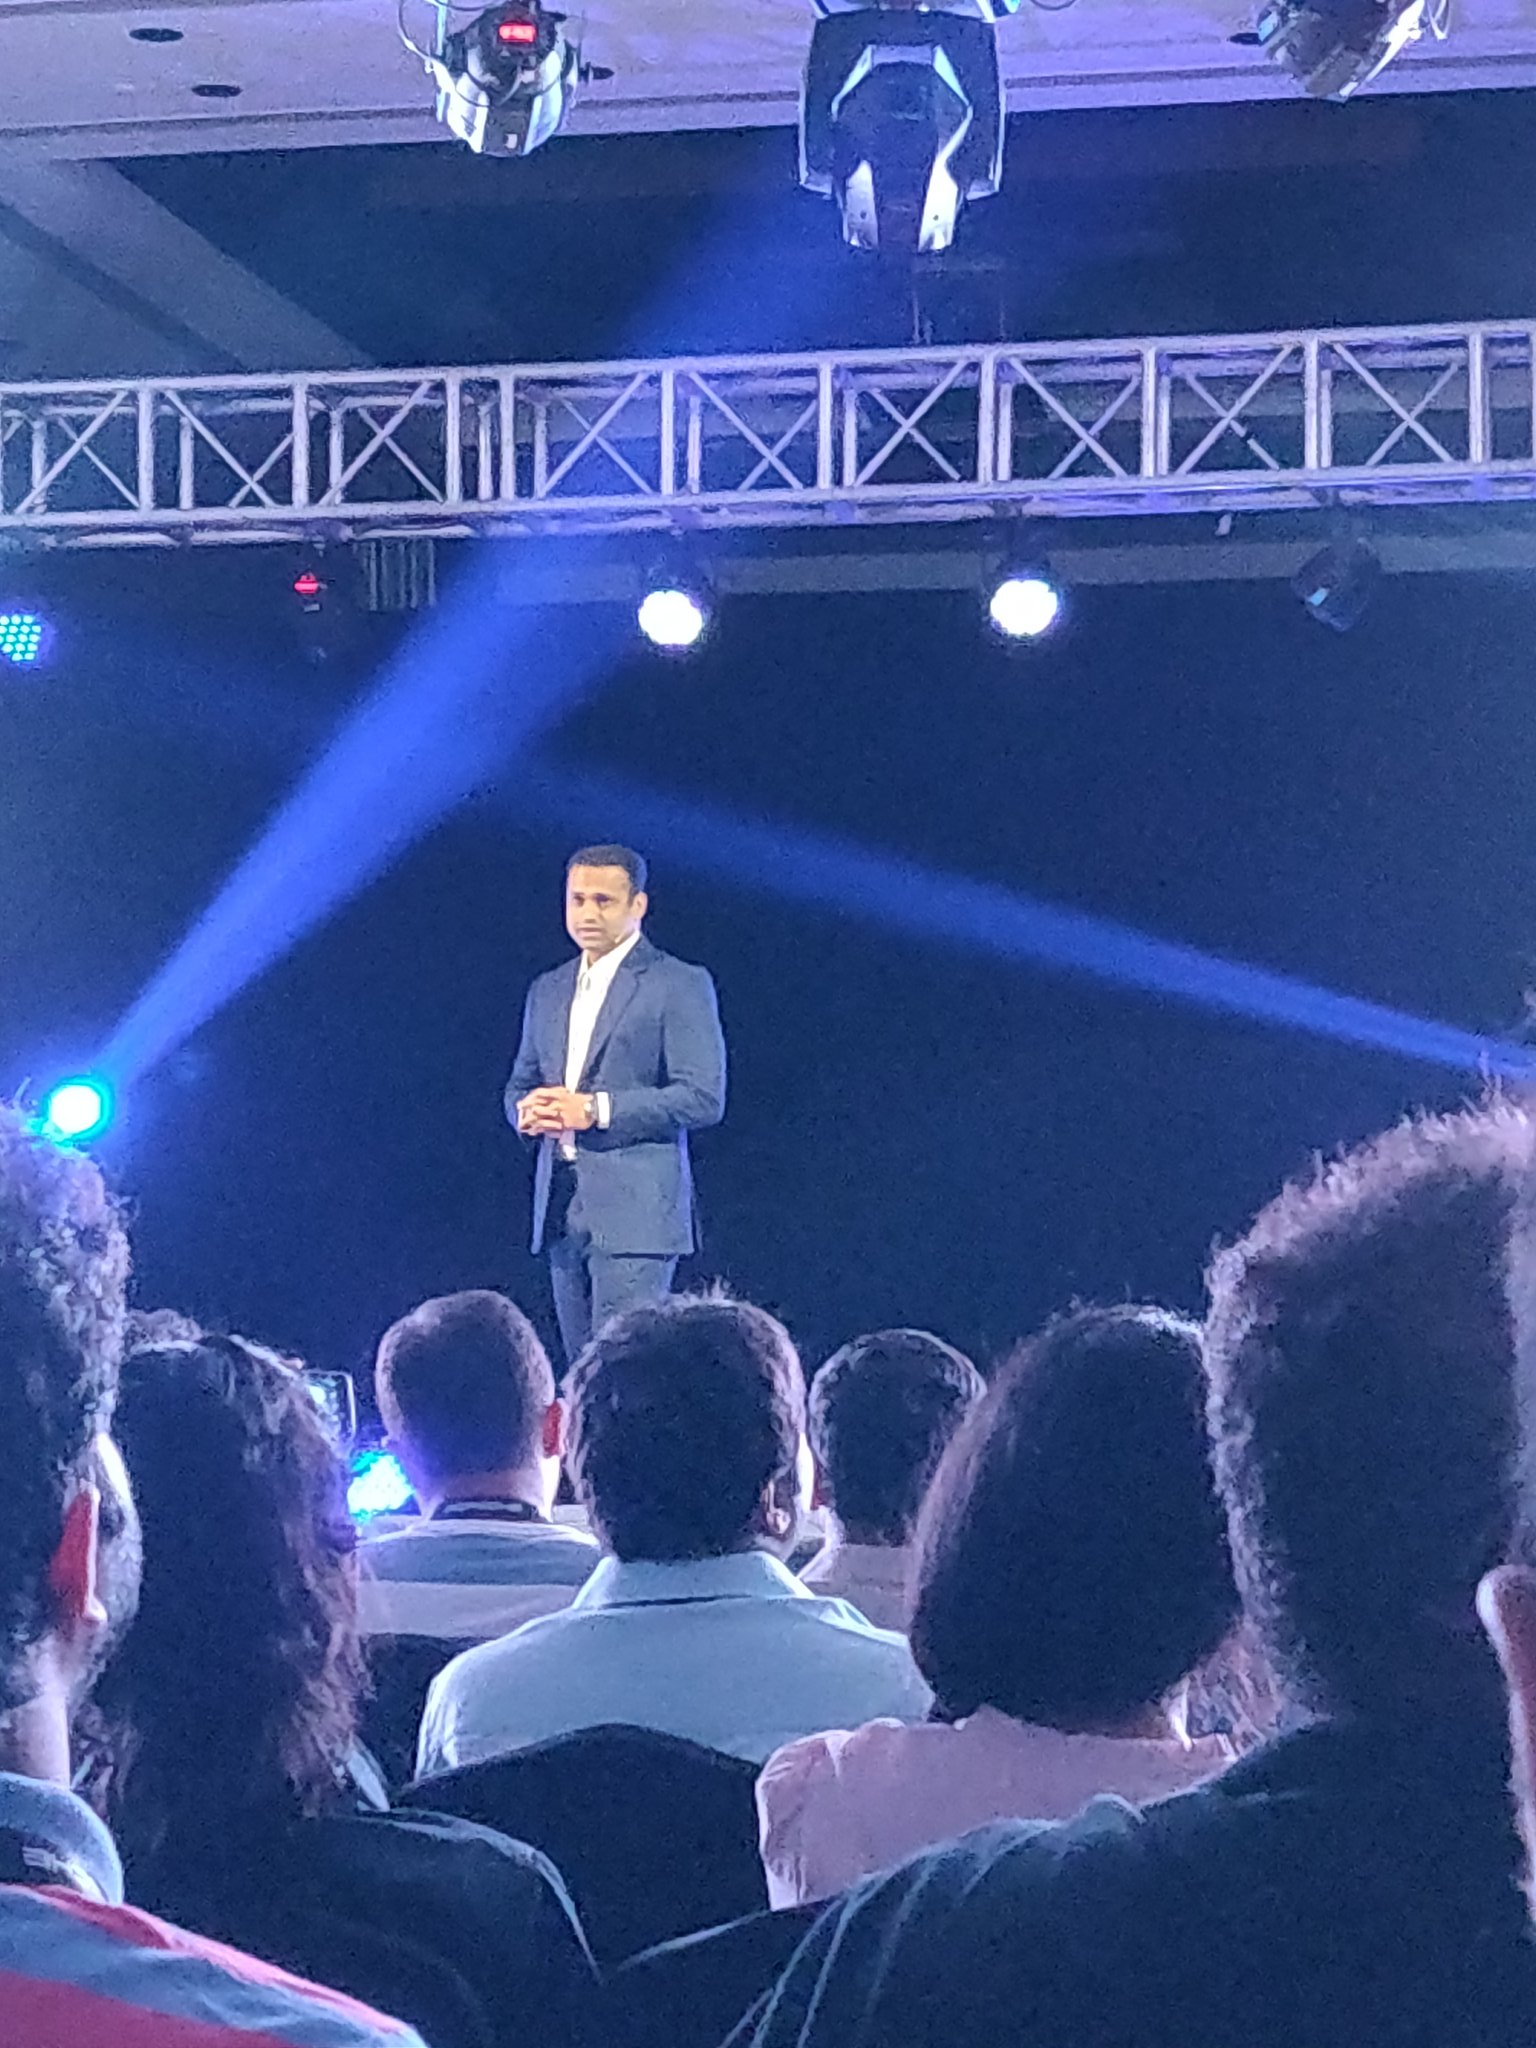 <p>&nbsp;Pavan Shetty, Director of #PorscheIndia, addresses the crowd and starts the event on an exhilarating note. #NewCayenne #SportscarTogether</p>